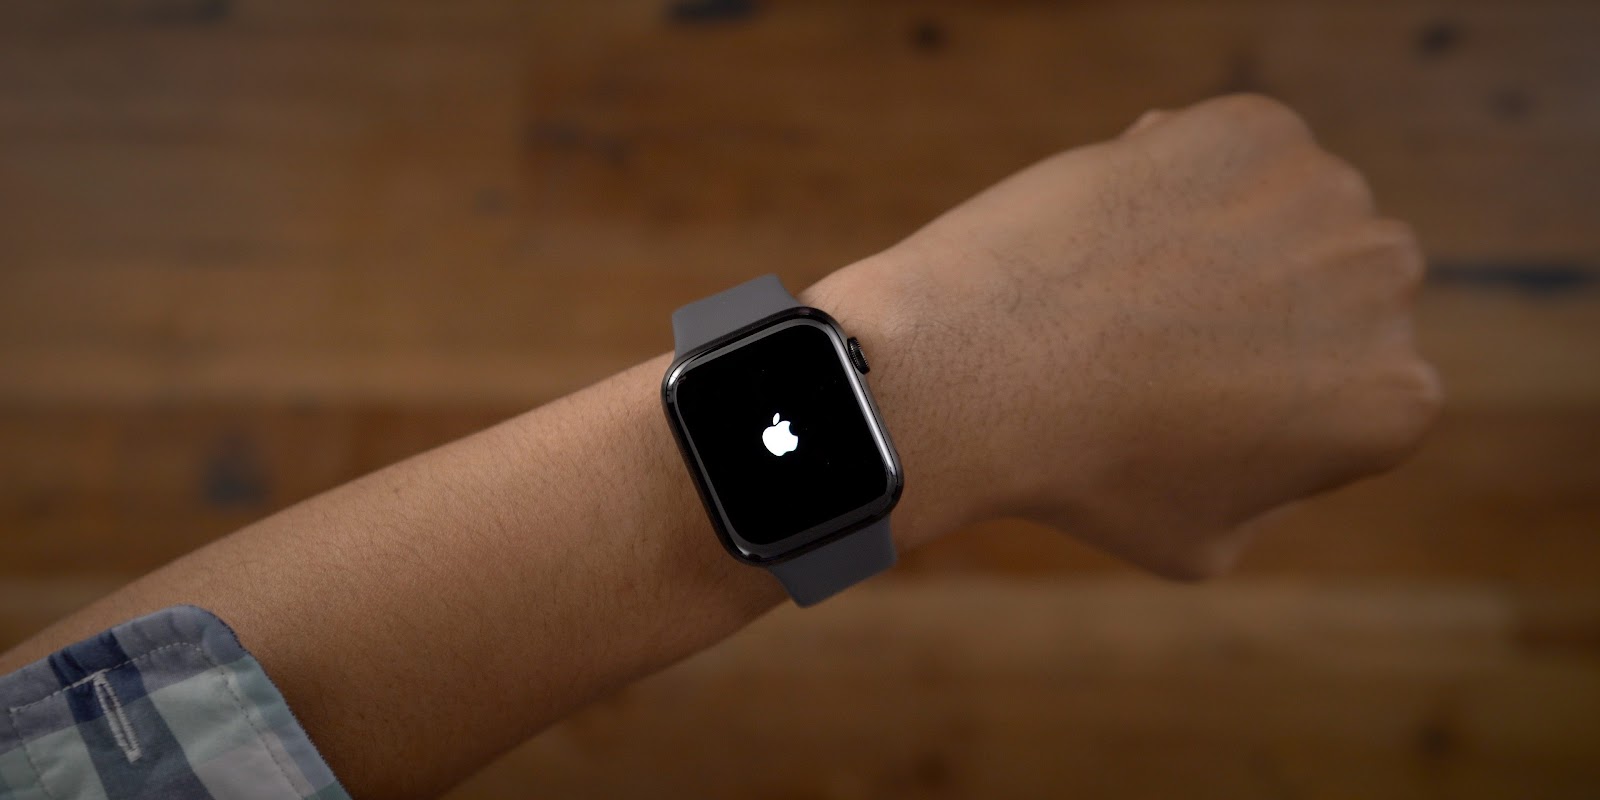 how to unpair apple watch without phone